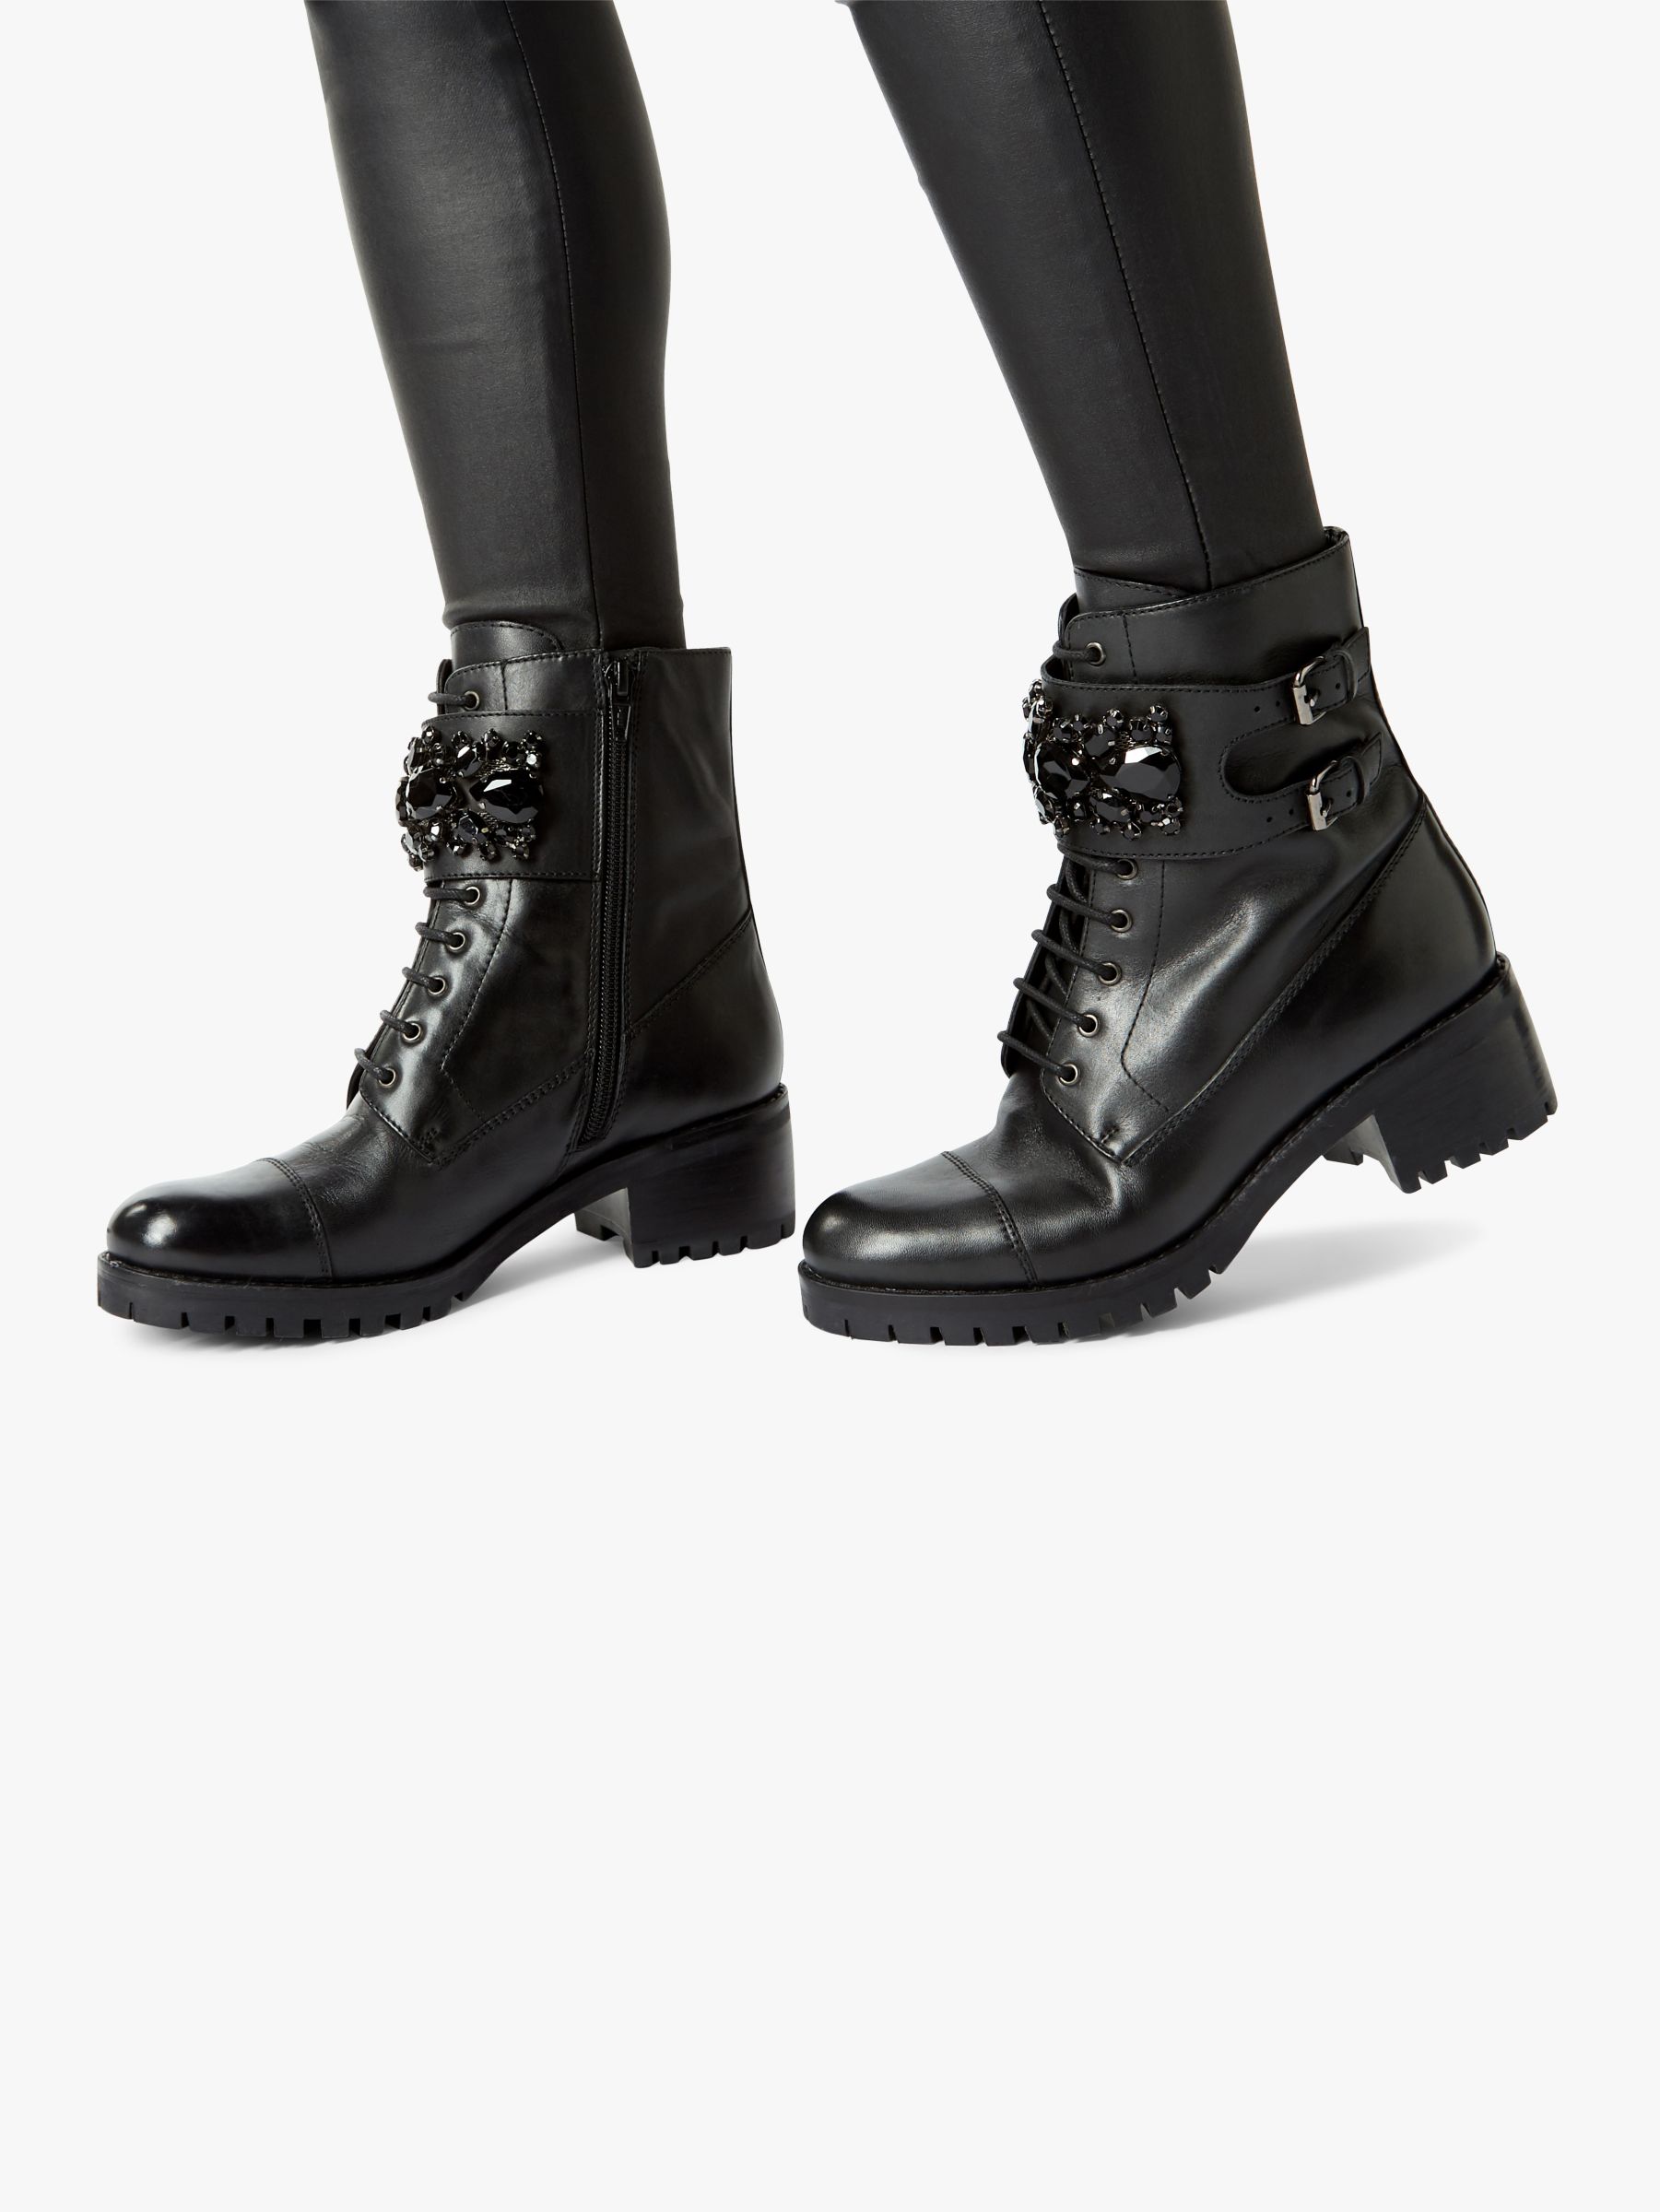 leather biker ankle boots with bejewelled straps